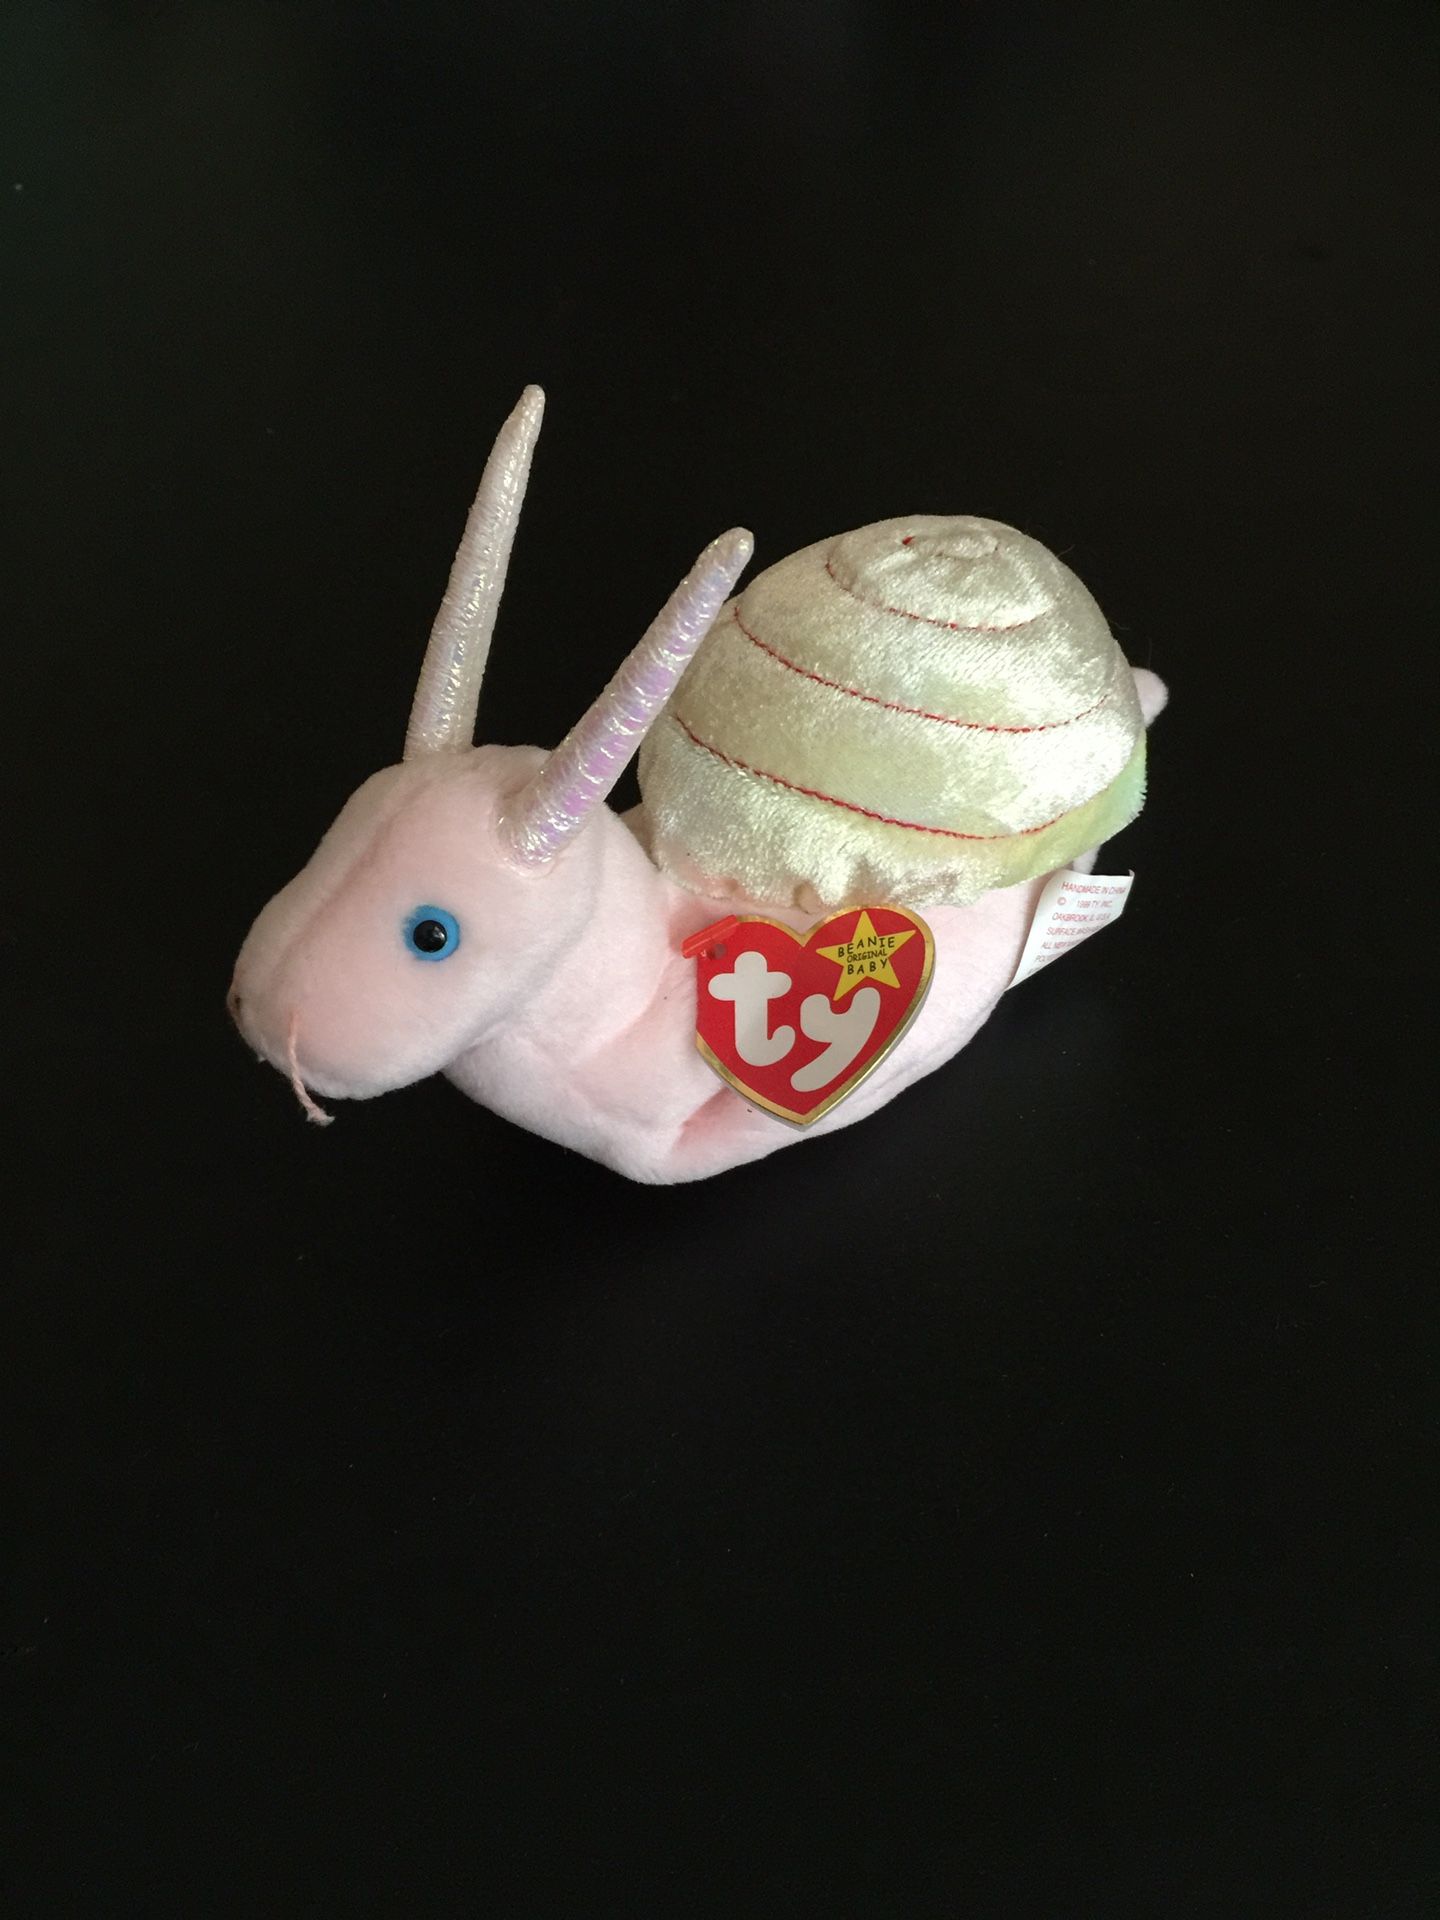 New Beanie Baby Snail $3.00 A Great Buy!